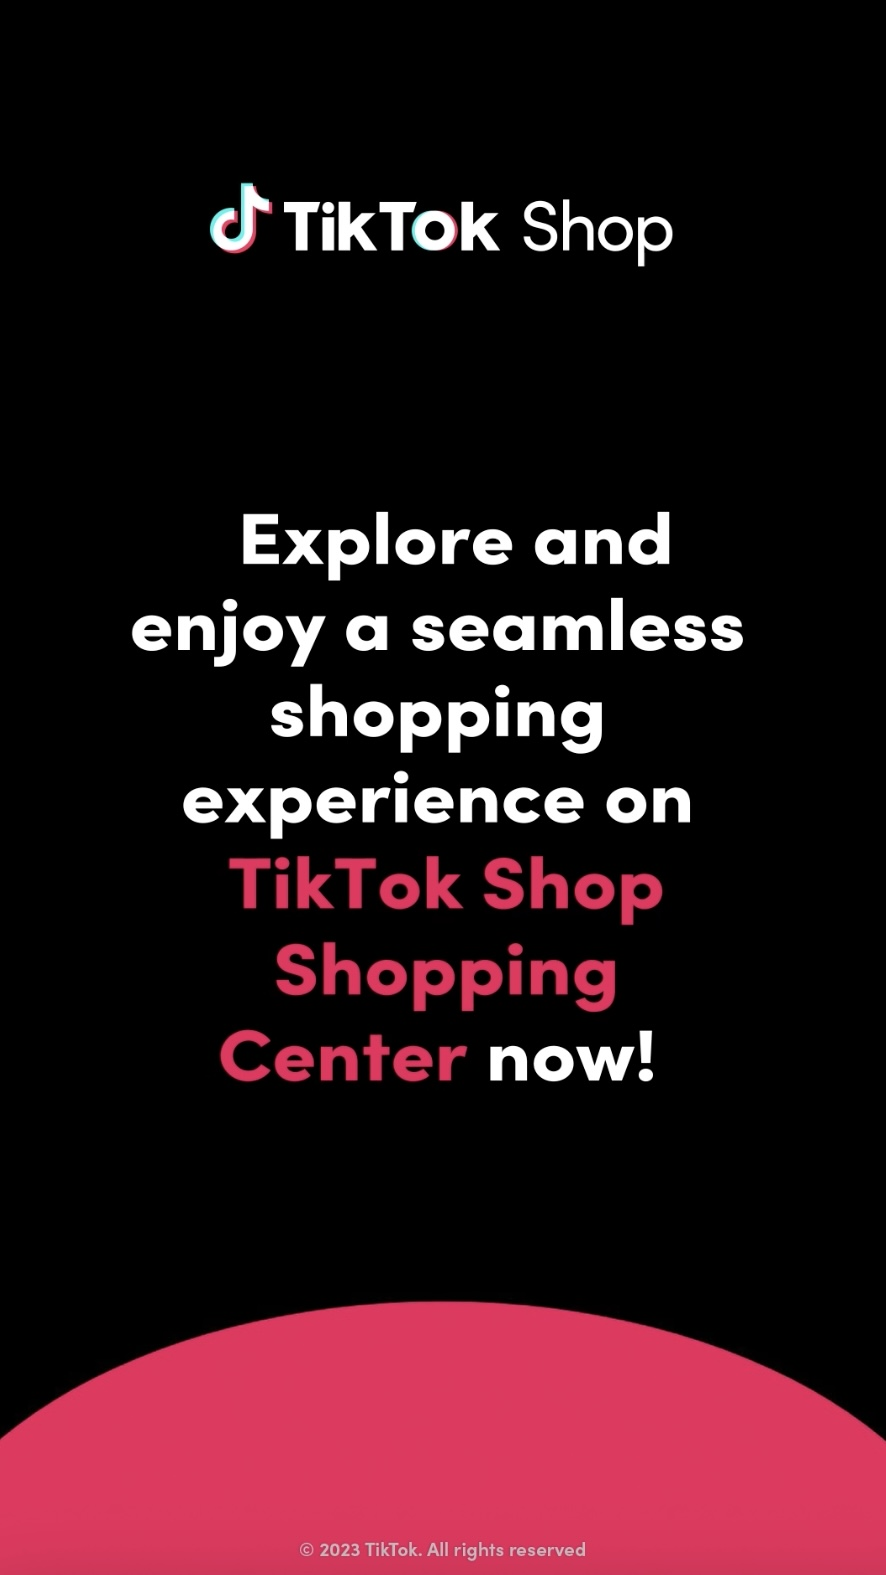 TikTok Shop announces its Center' tab for greater